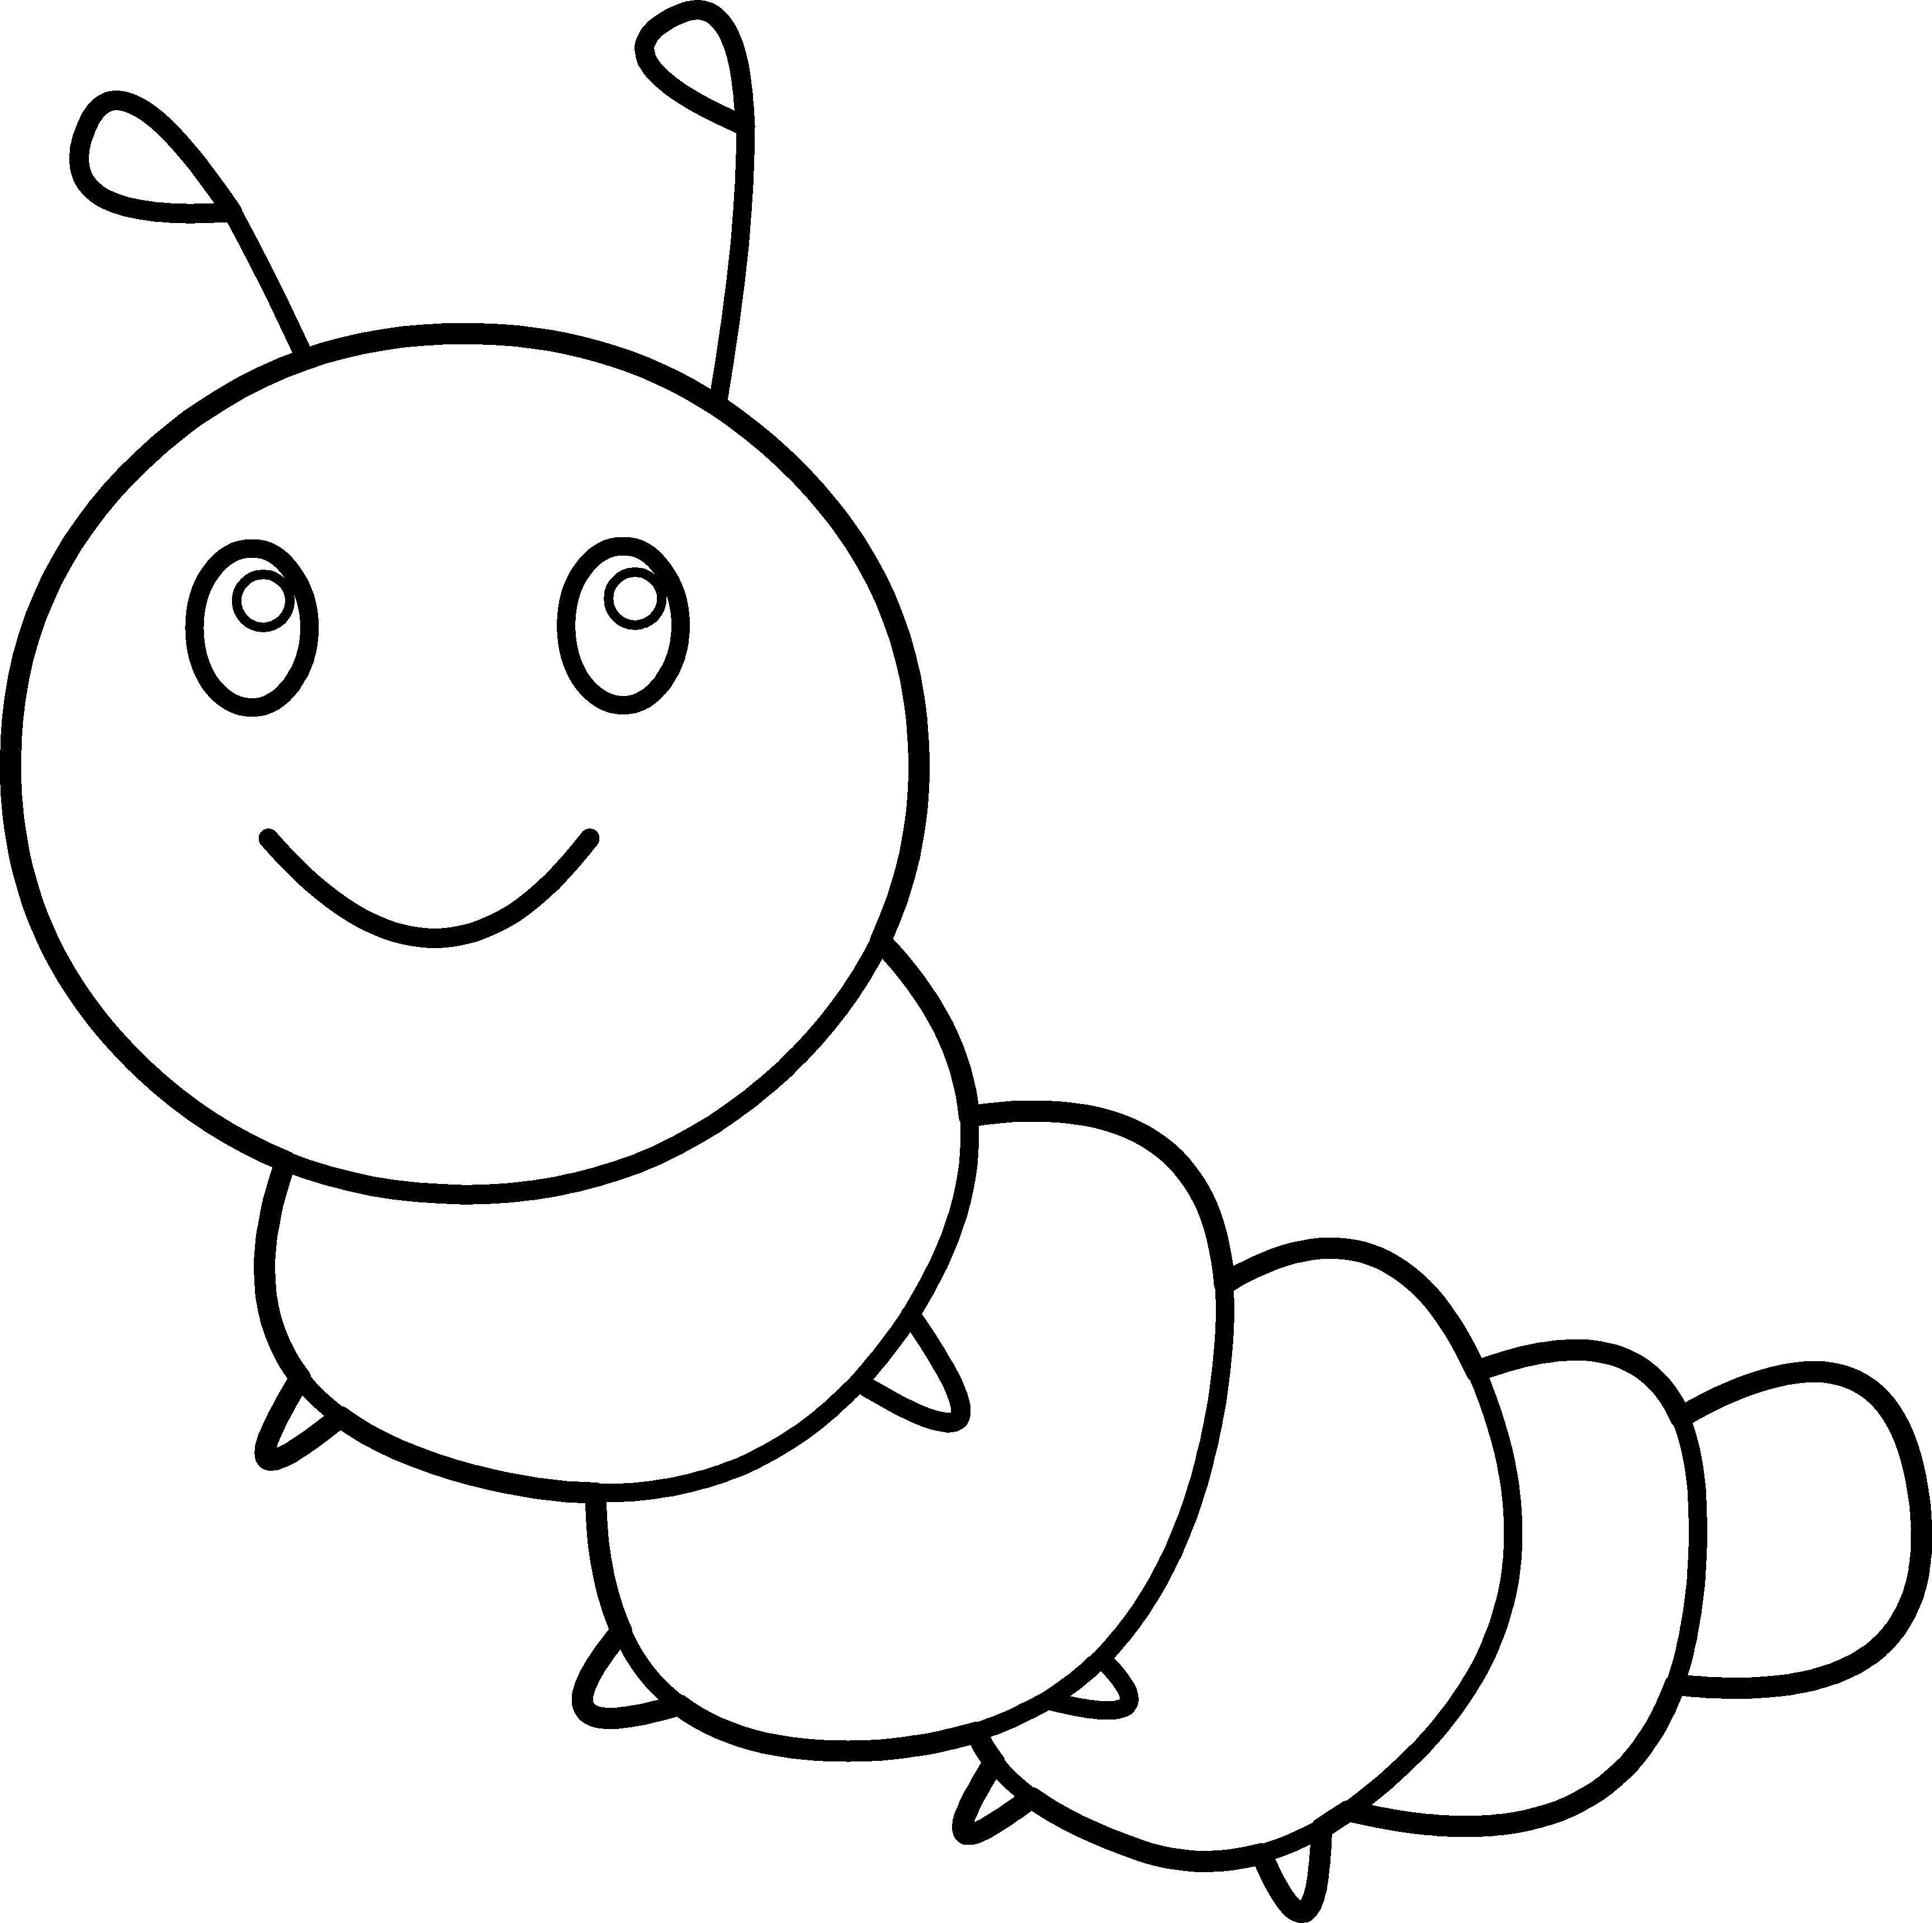 Happy caterpillar coloring page. Worm clipart cutterpillar